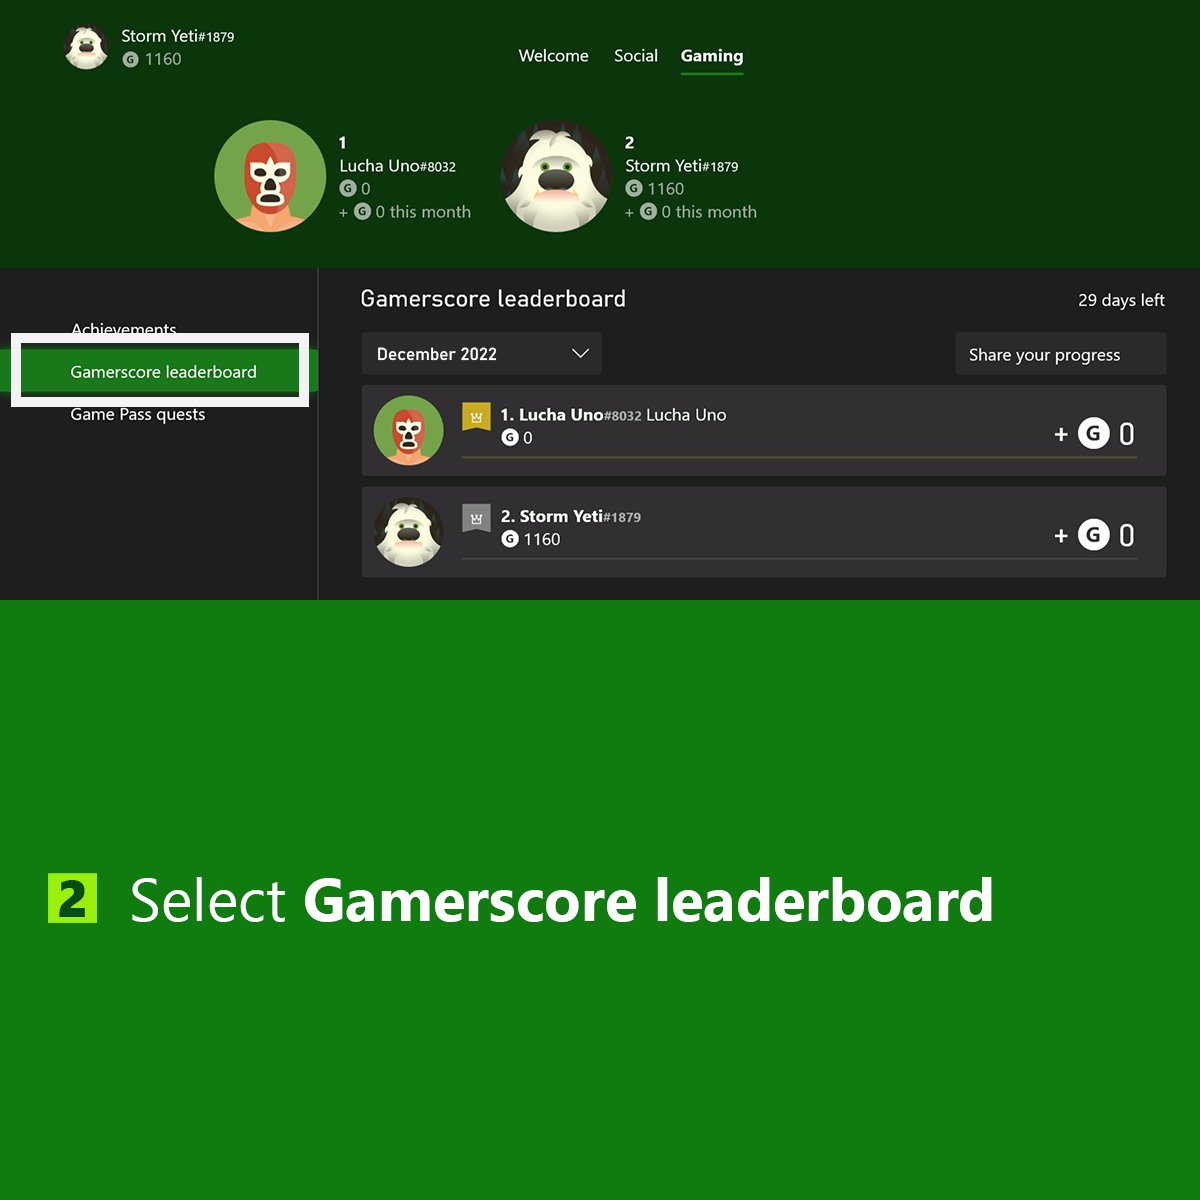 Xbox 360 Games Now Count Toward Monthly Gamerscore Leaderboards